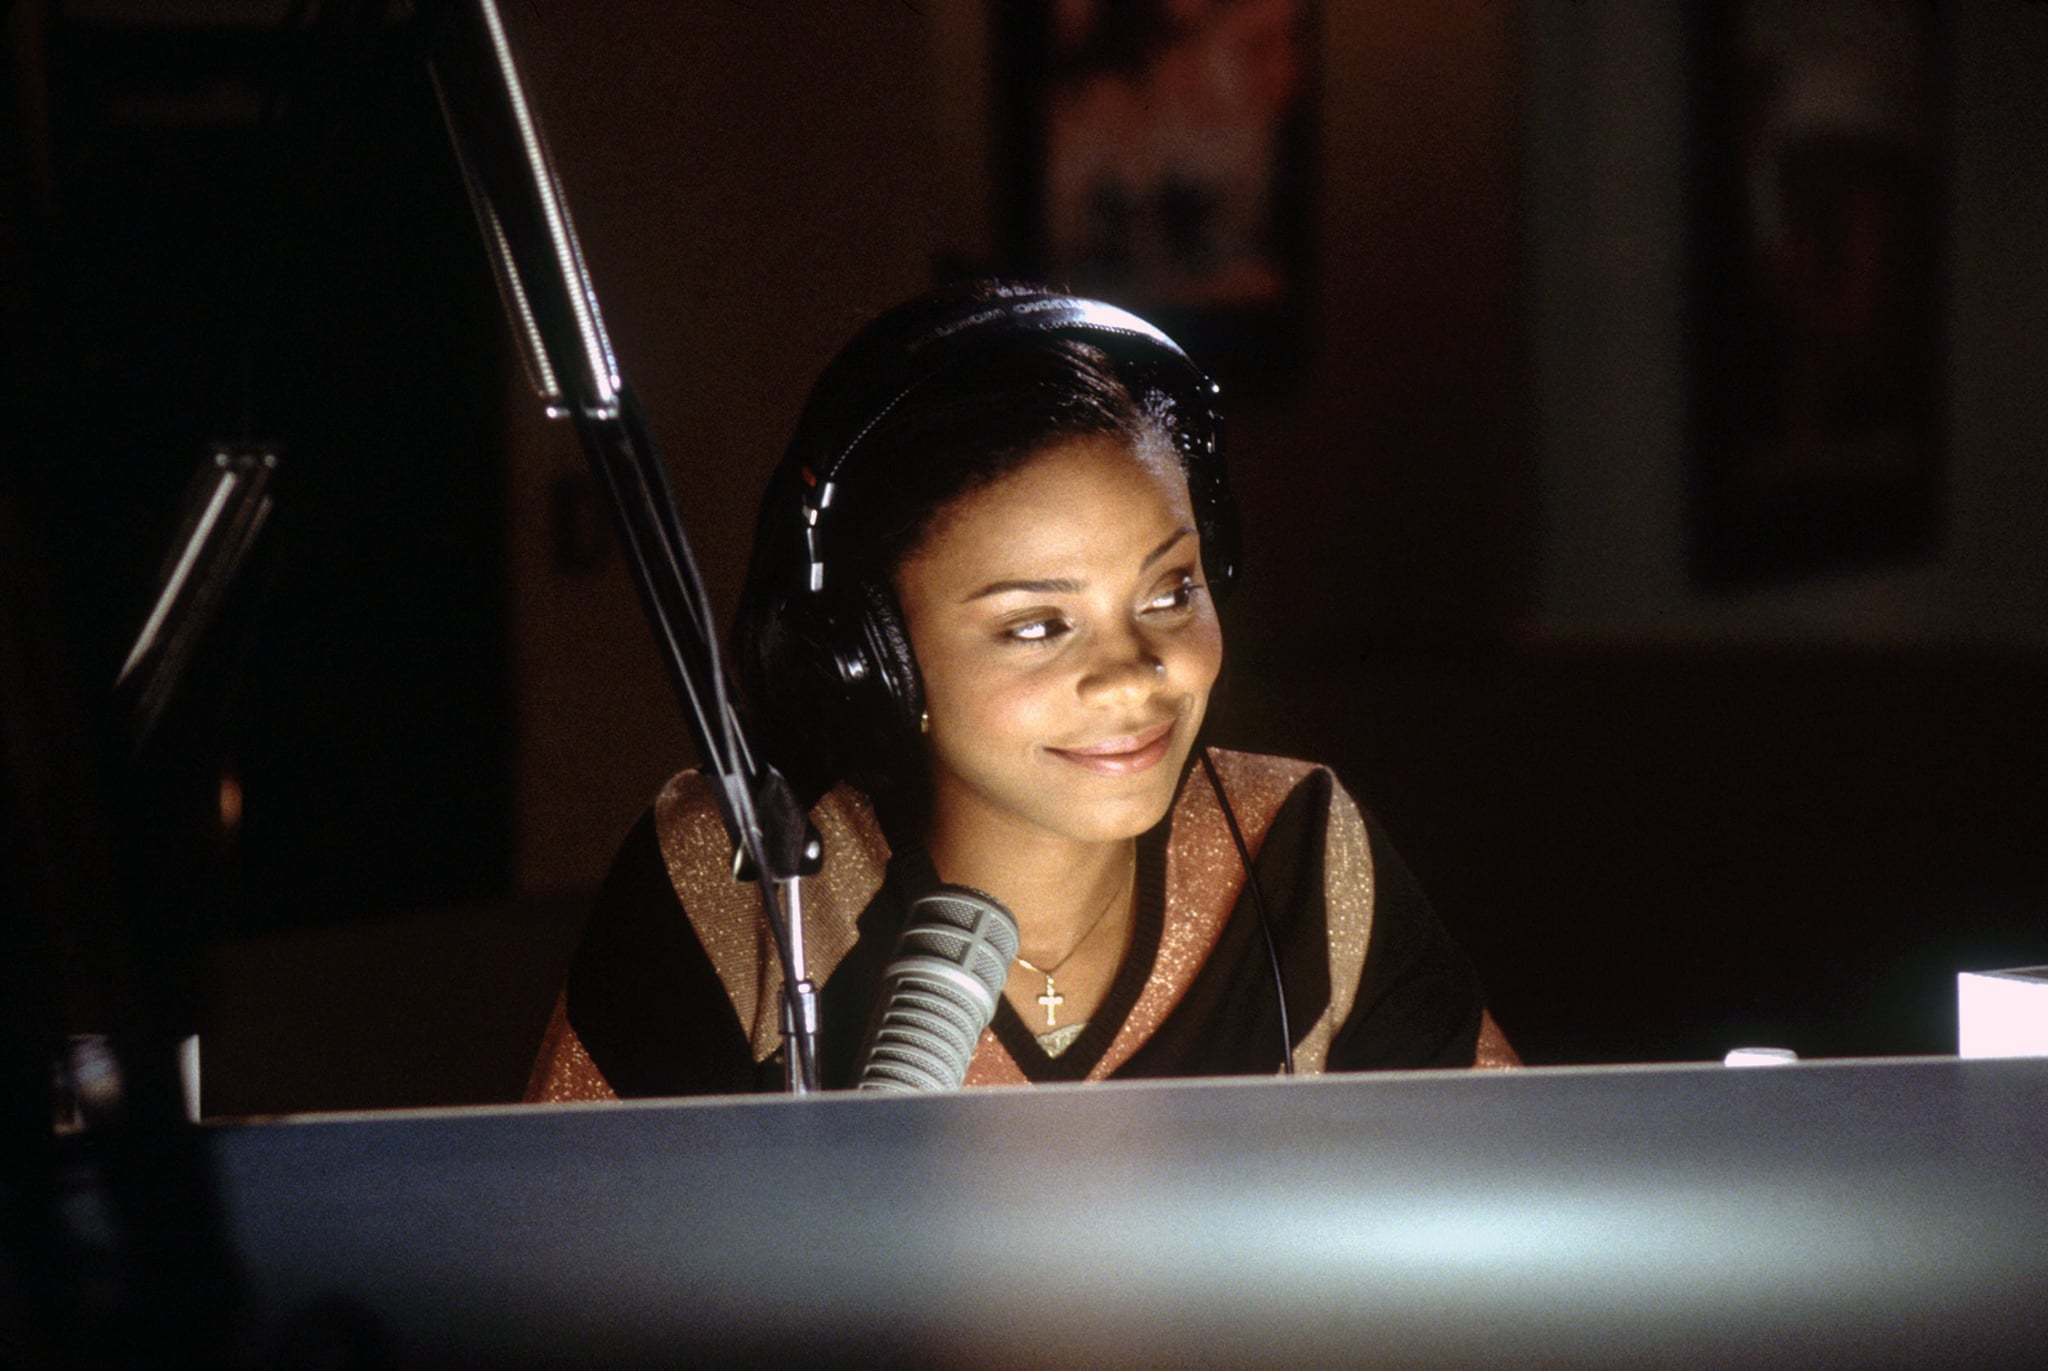 BROWN SUGAR, Sanaa Lathan, 2002, TM & Copyright (c) 20th Century Fox Film Corp. All rights reserved.